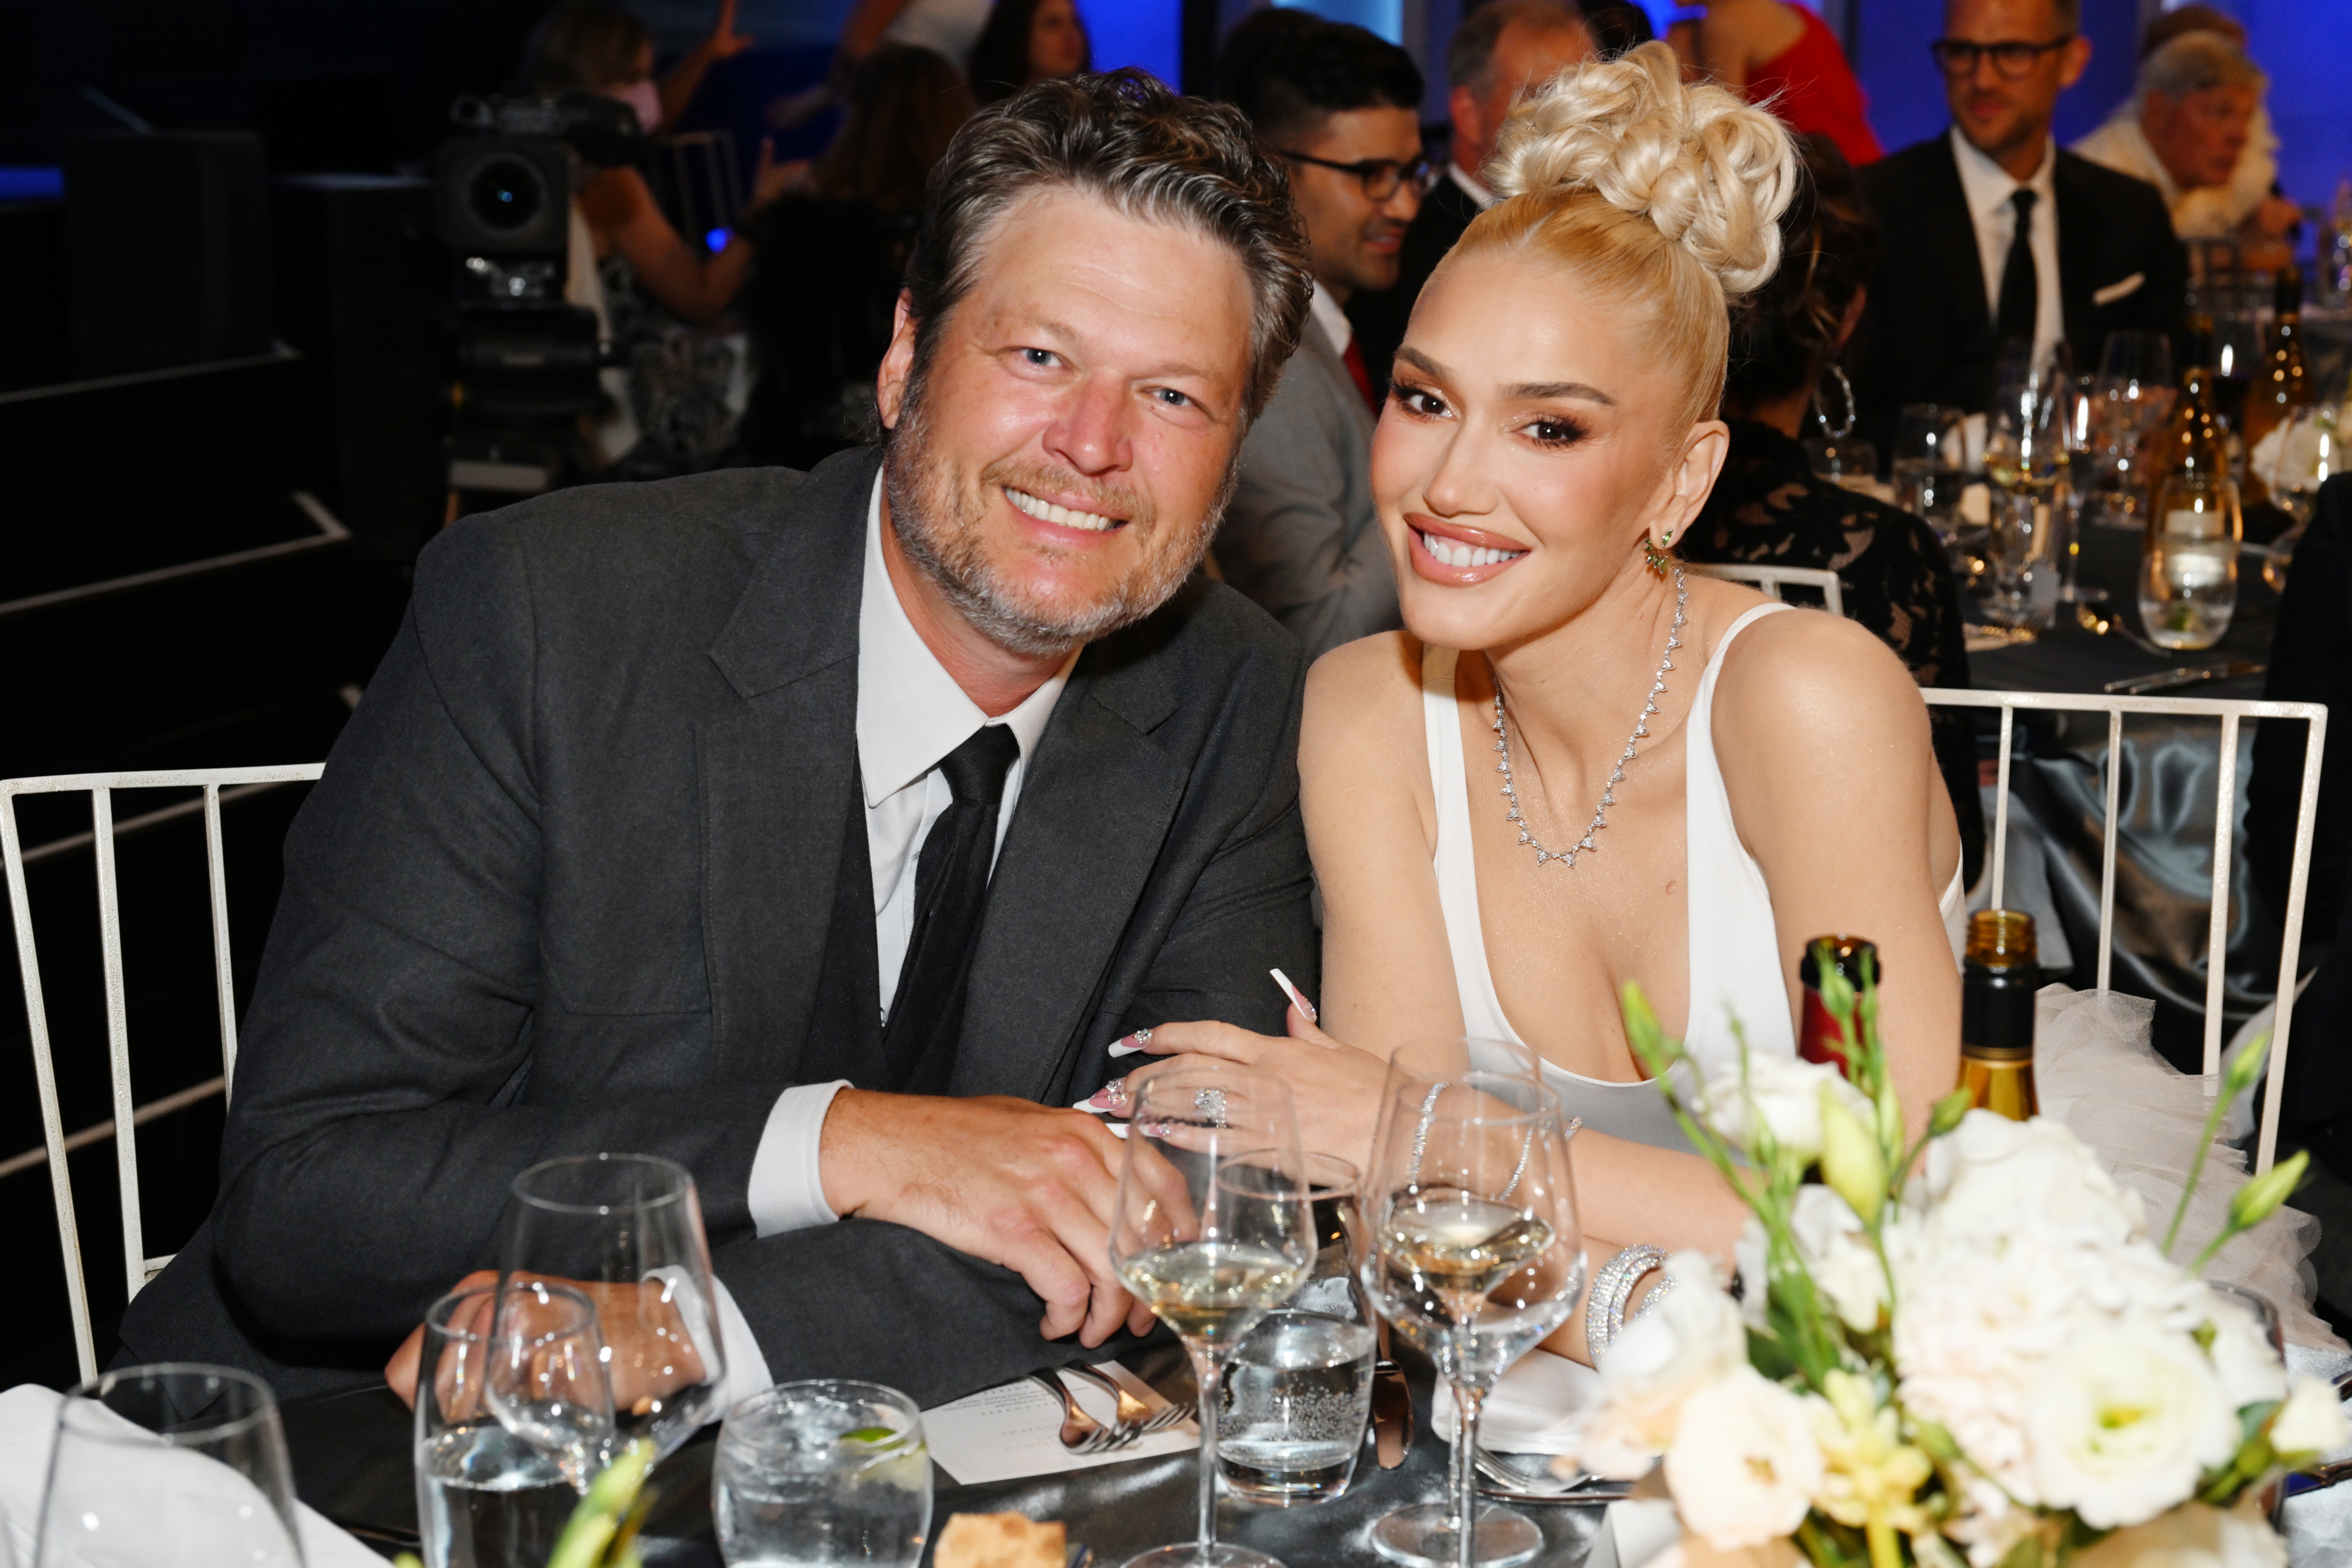 Blake and Gwen have been married since 2021